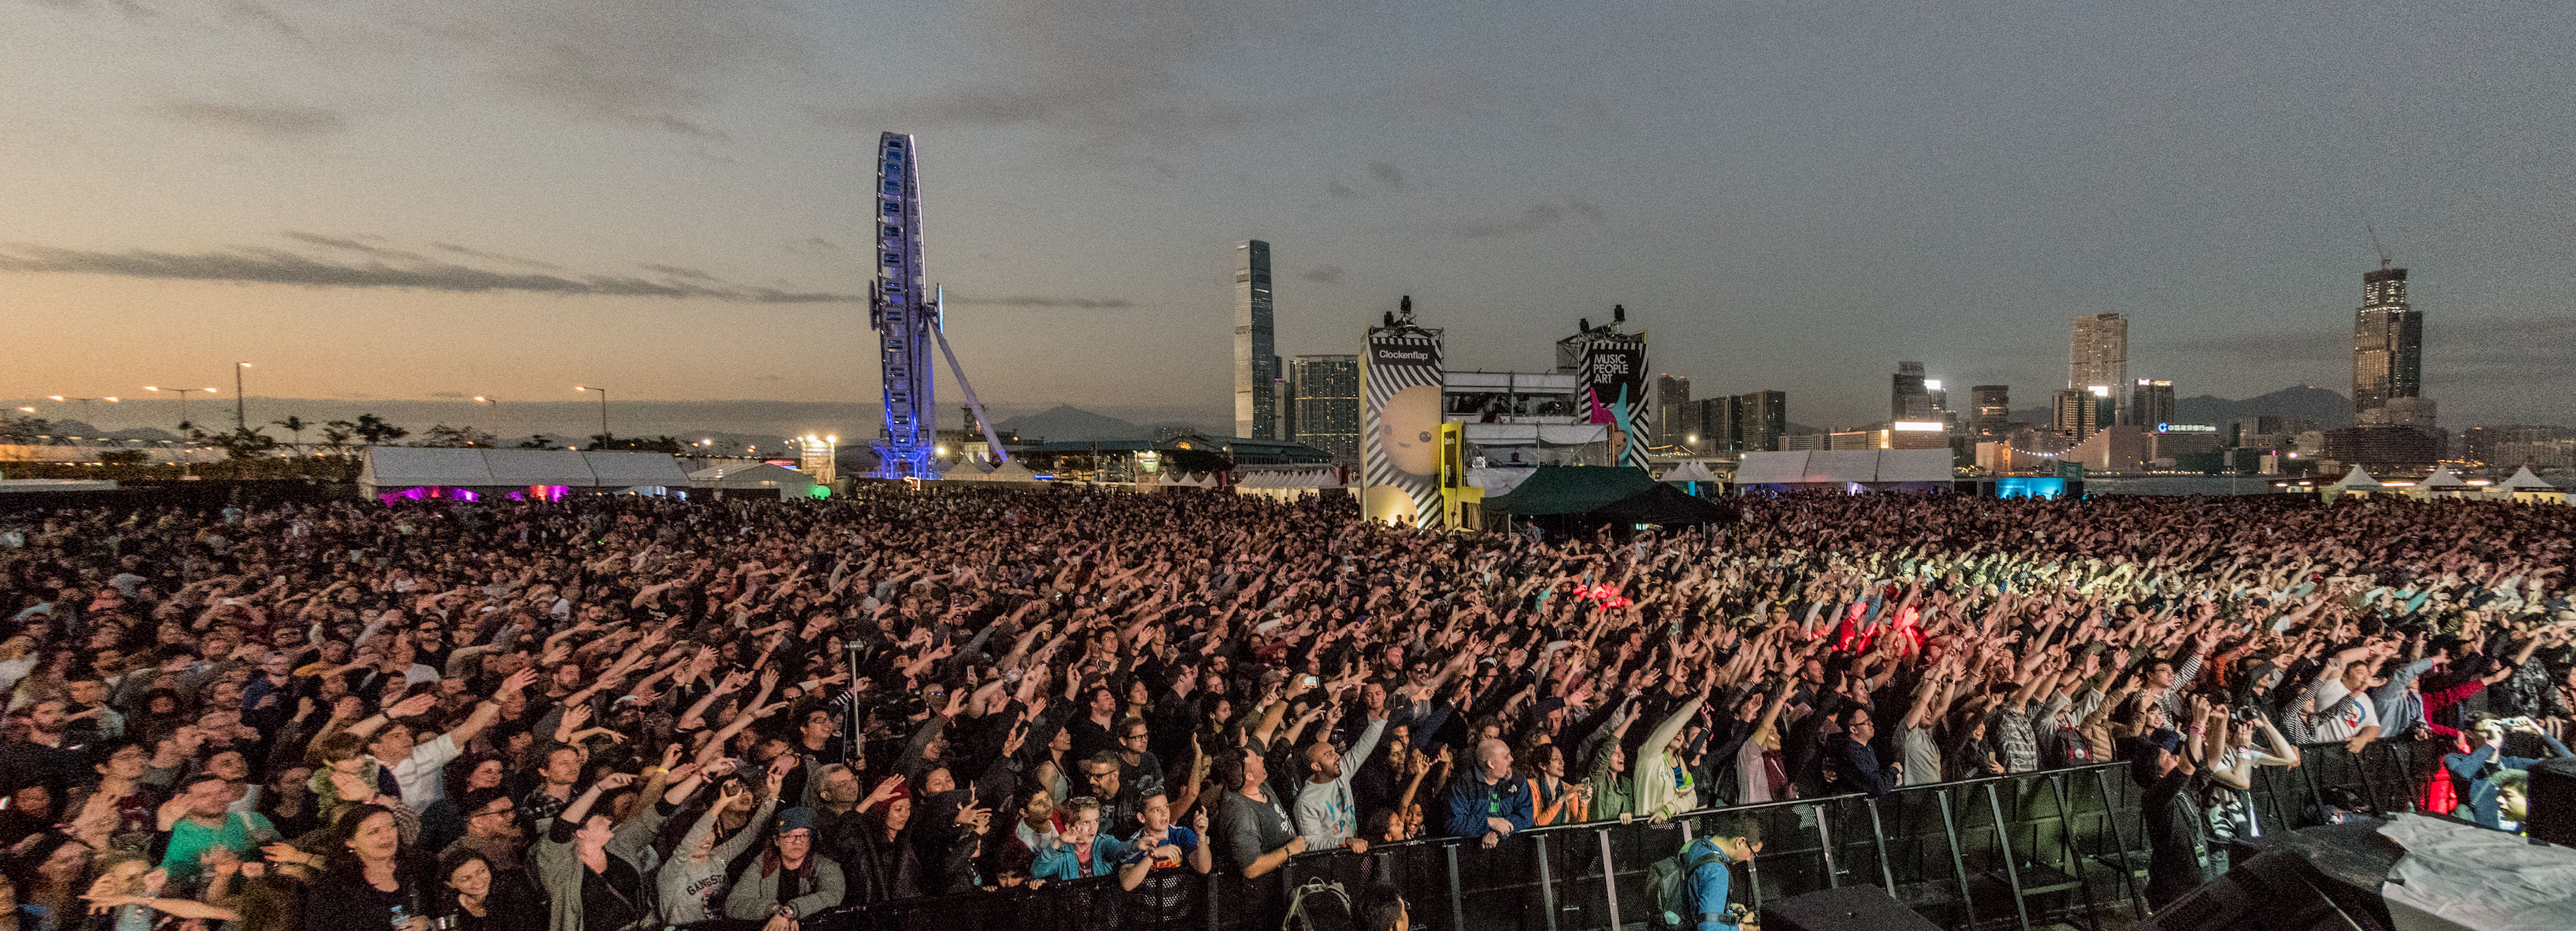 Clockenflap announces first round of artists for 2017 festival